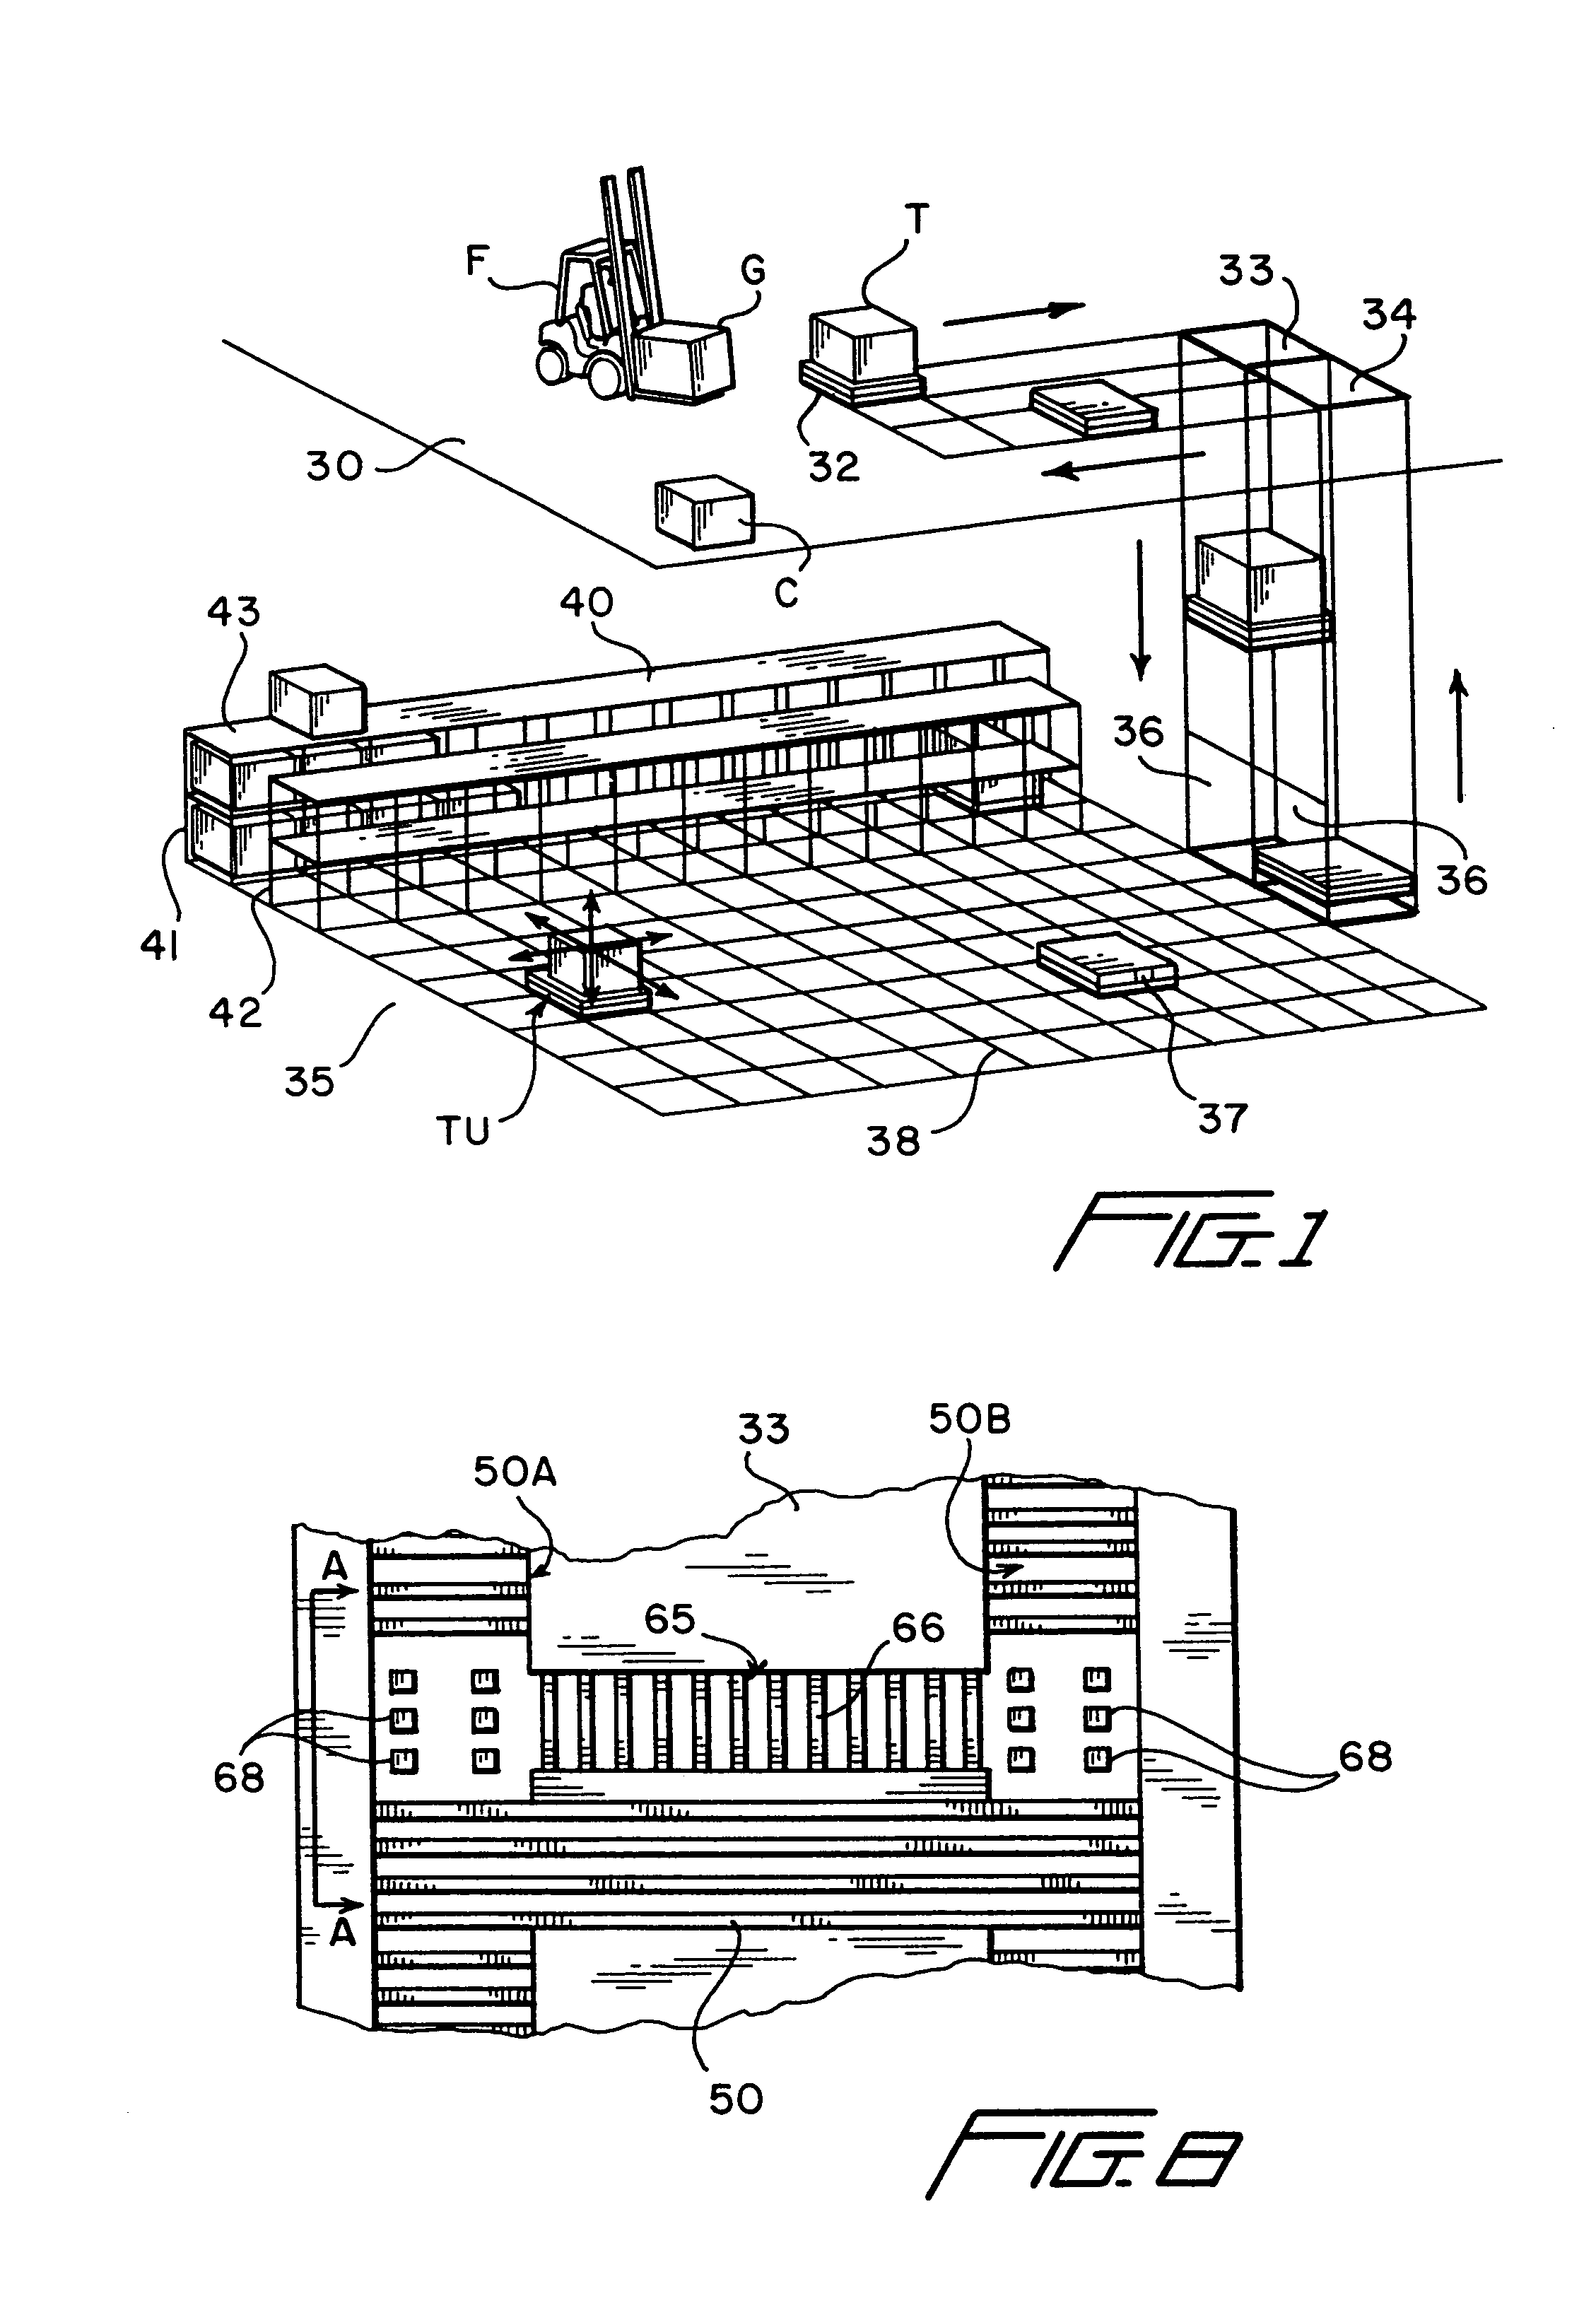 Automated material handling system with motorized transfer vehicles